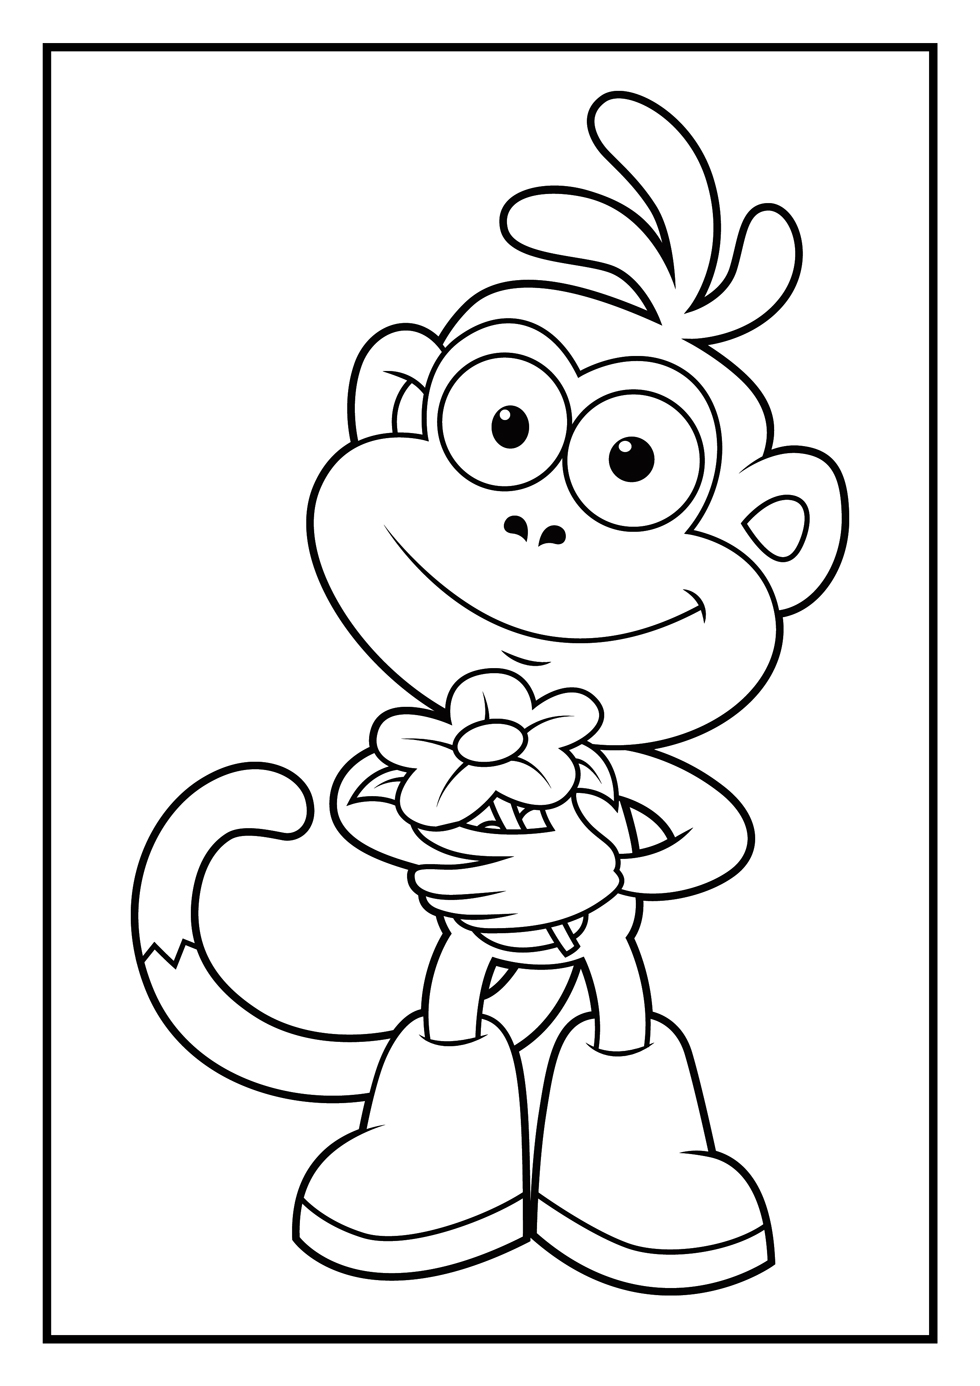 Download Dora Coloring Pages | Diego Coloring Pages